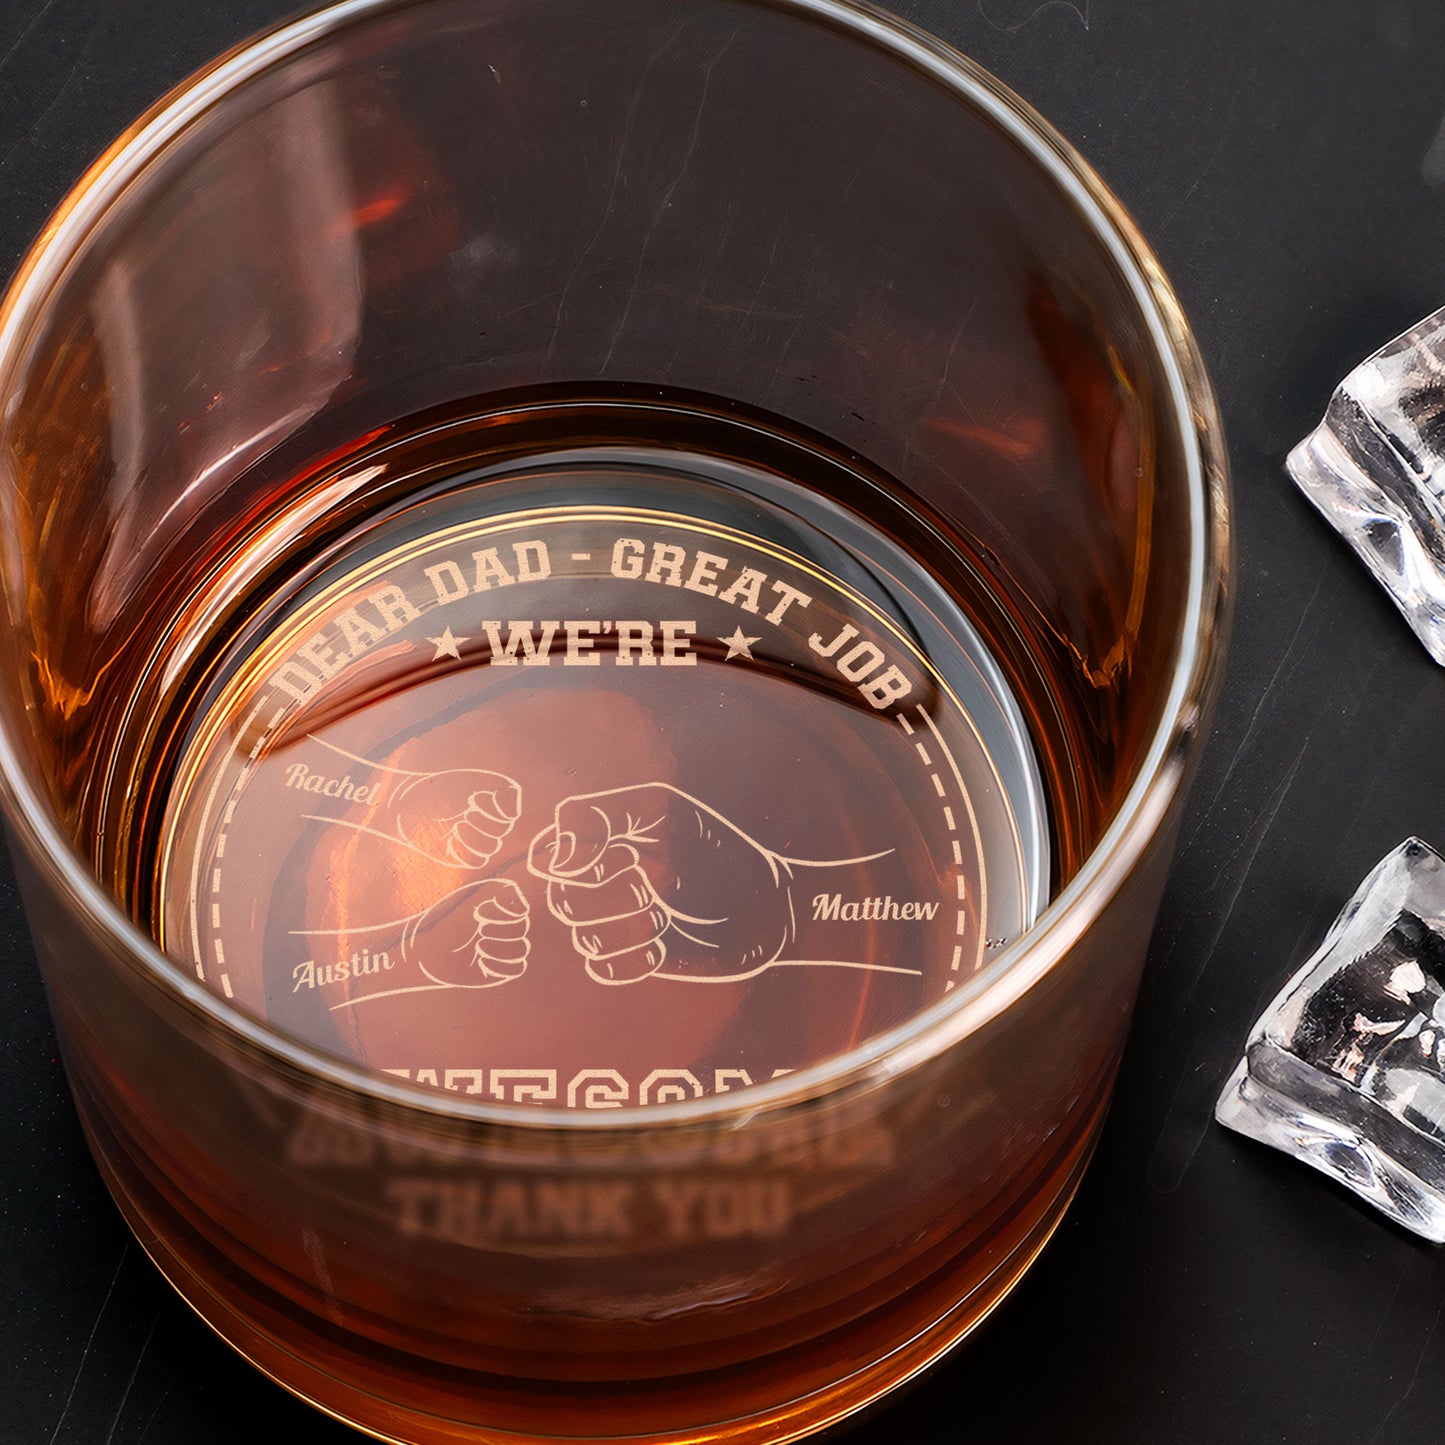 Dear Dad Great Job We're Awesome - Personalized Engraved Whiskey Glass